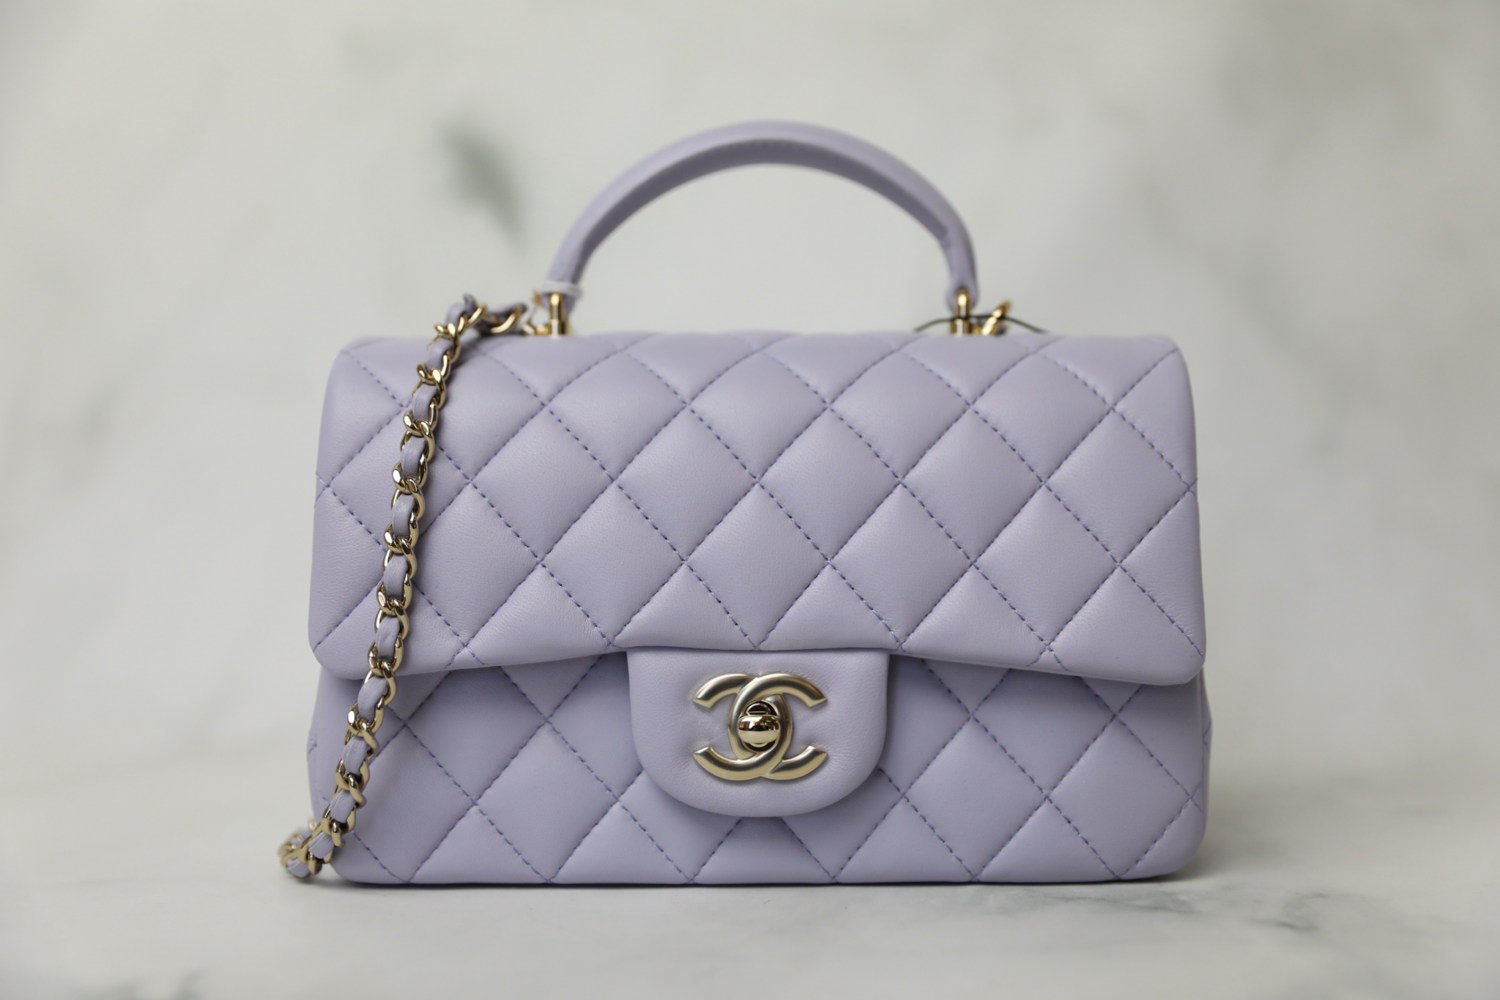 IGLIVE Chanel Mini with Top Handle, Purple Lambskin with Gold Hardware, Preowned in Box (Ships From London)